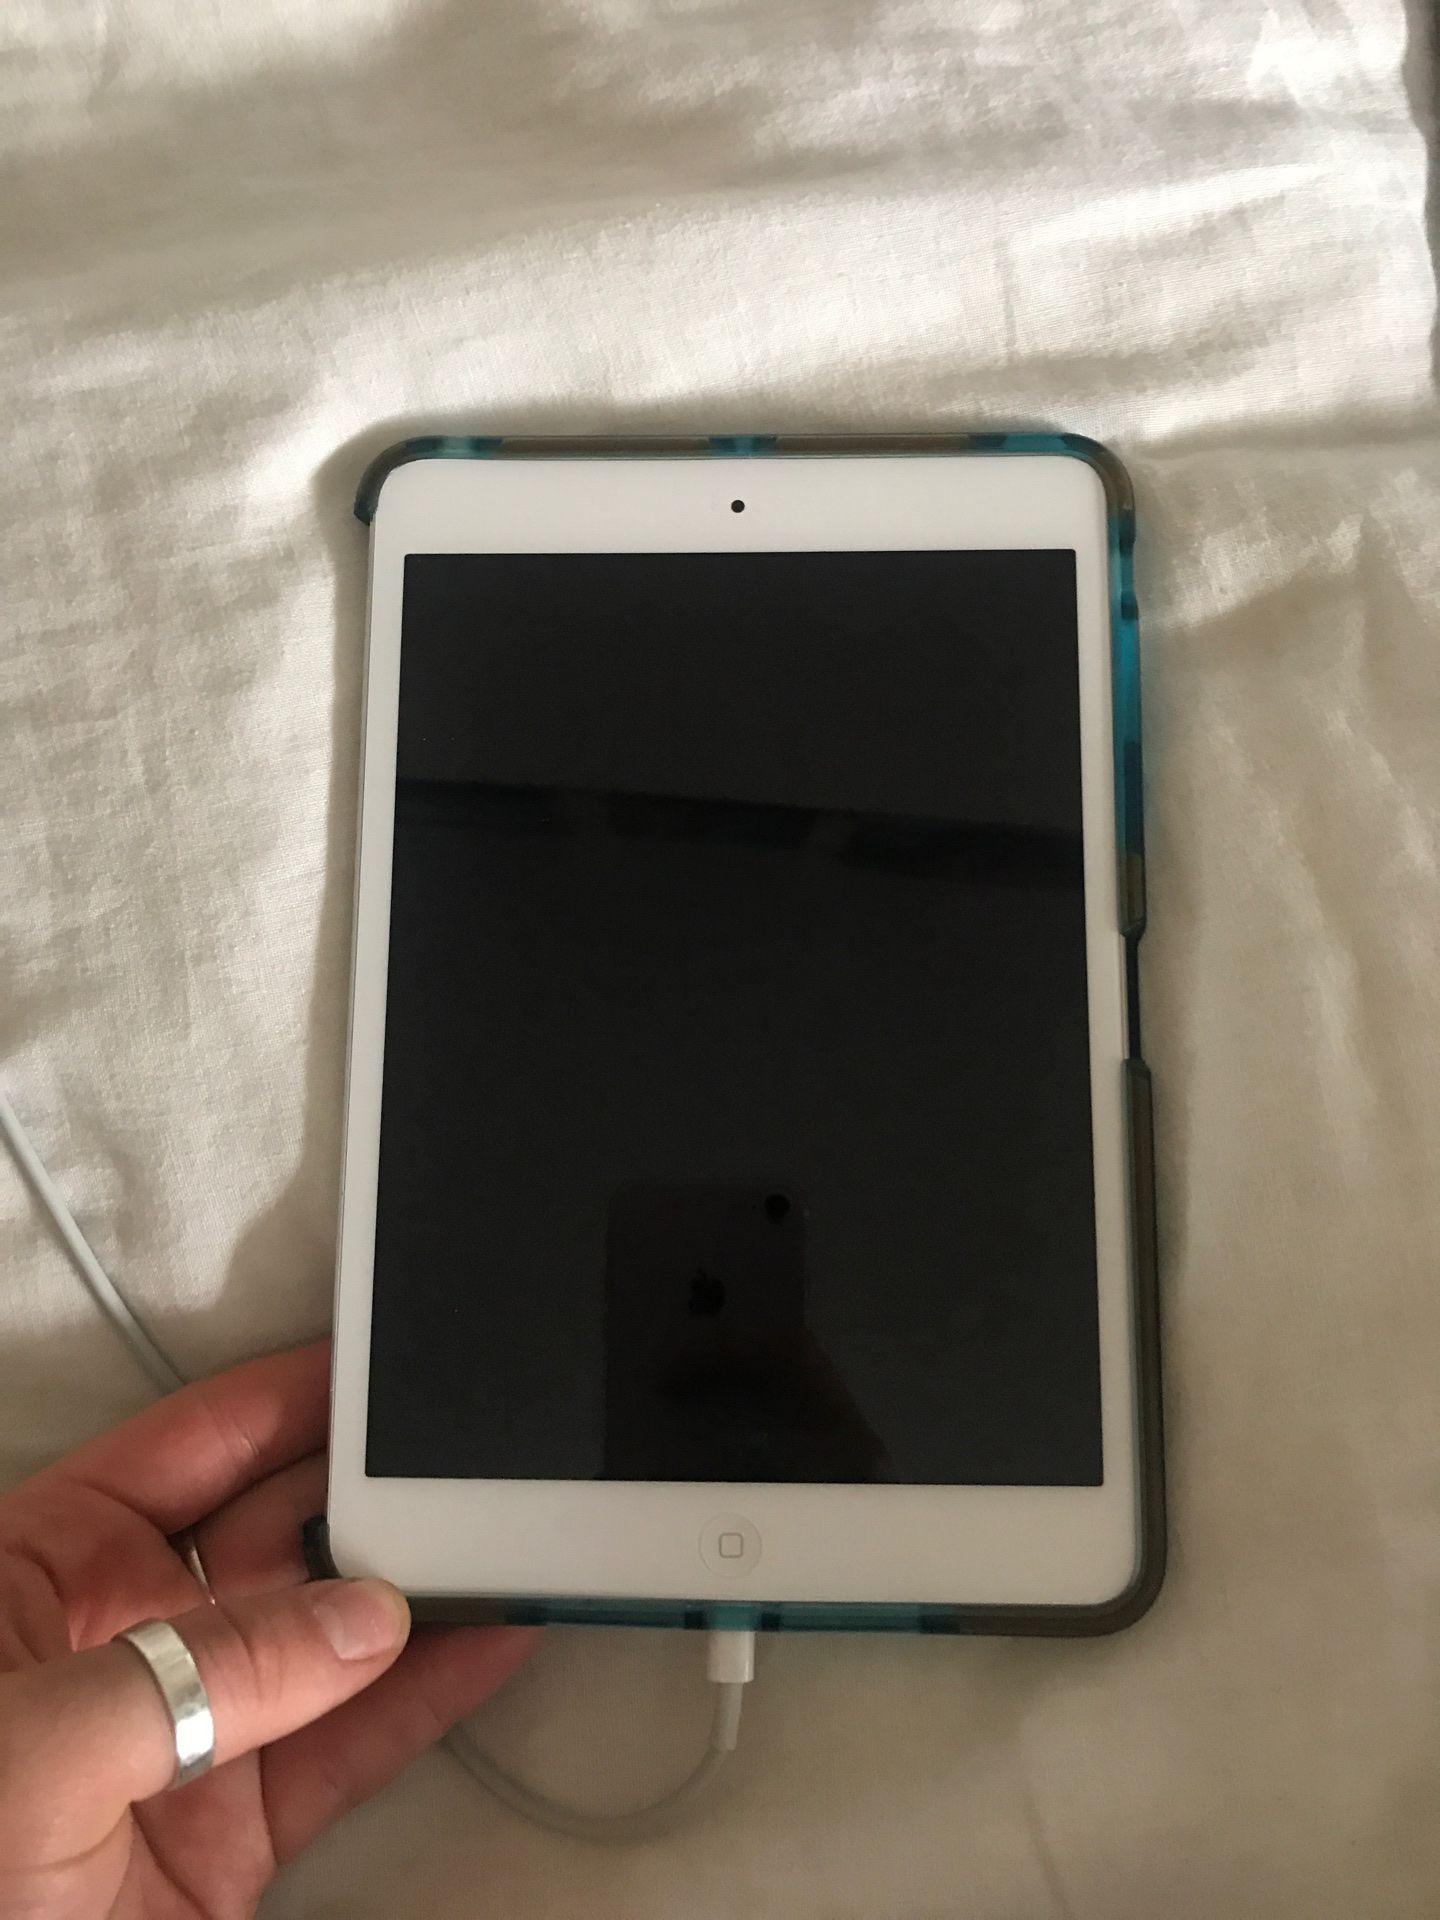 iPad Mini, Model 1432, barely used and perfect condition